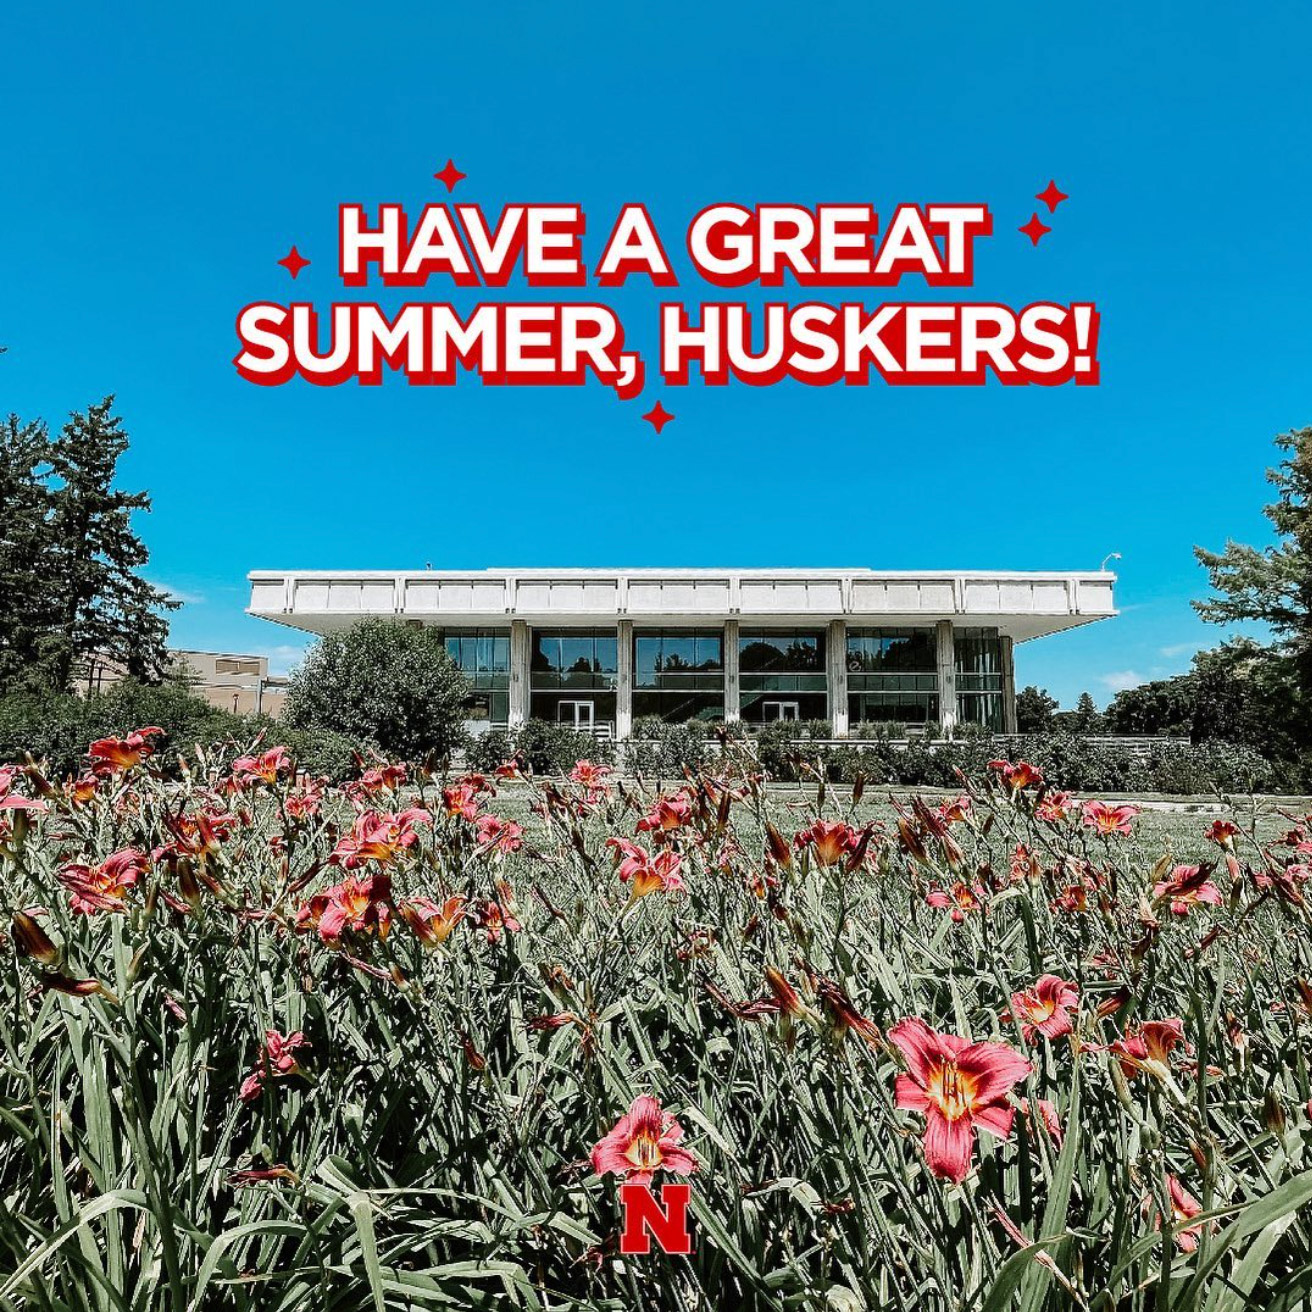 Here’s to having a great summer!☀️  Whether you are researching, working, interning, vacationing, or just relaxing, make the most of it and enjoy this time!